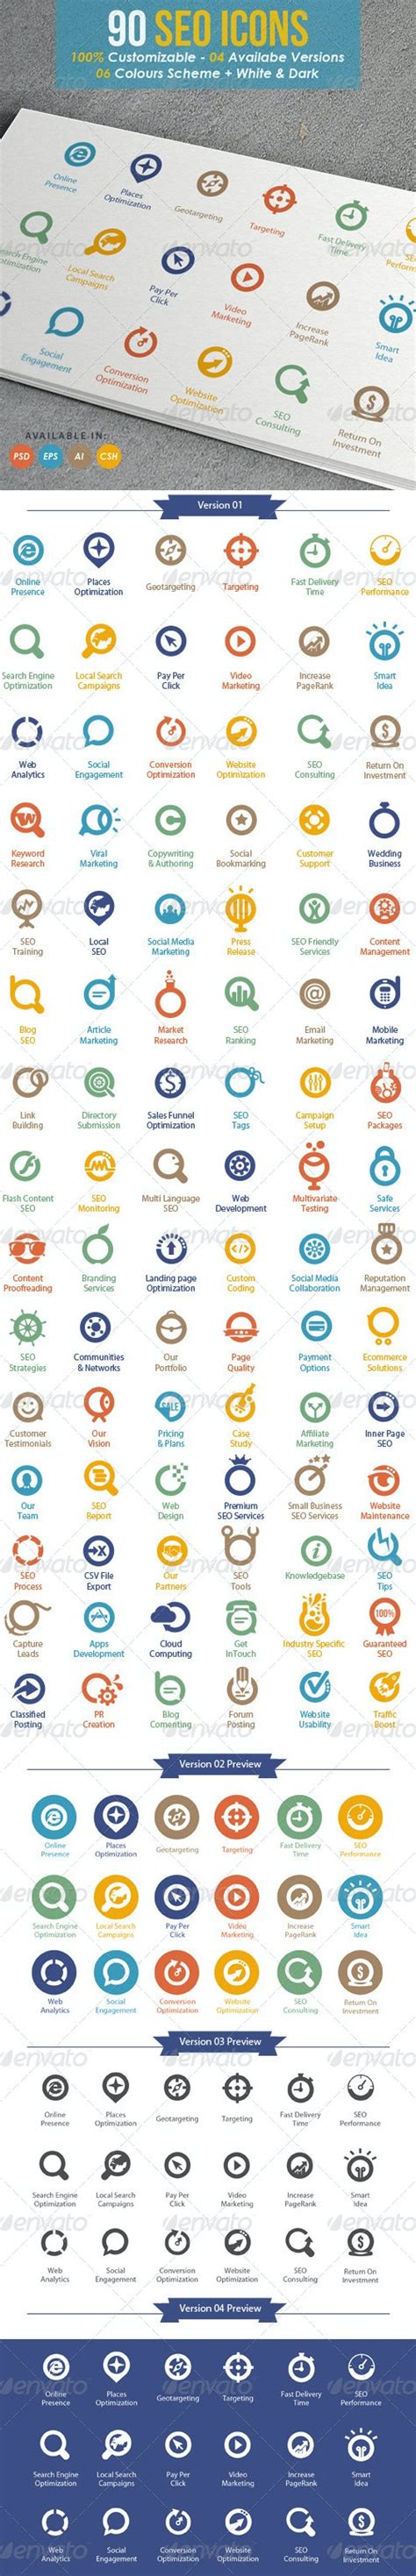 Targo Premium Seo Industry Icons By Kh2838 Graphicriver